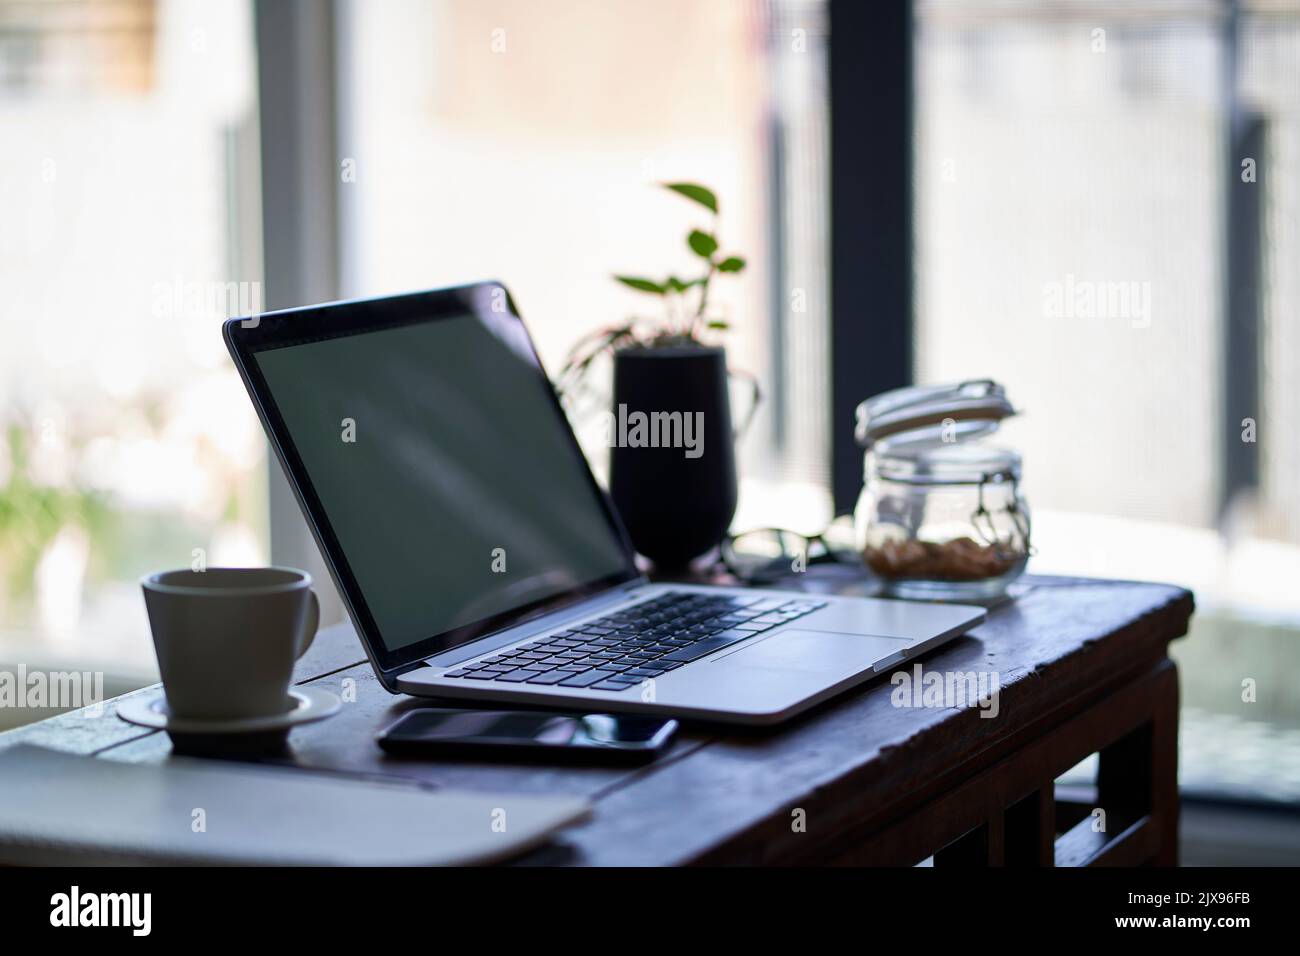 workspace of a freelancer working from home with laptop and cellphone on end table Stock Photo